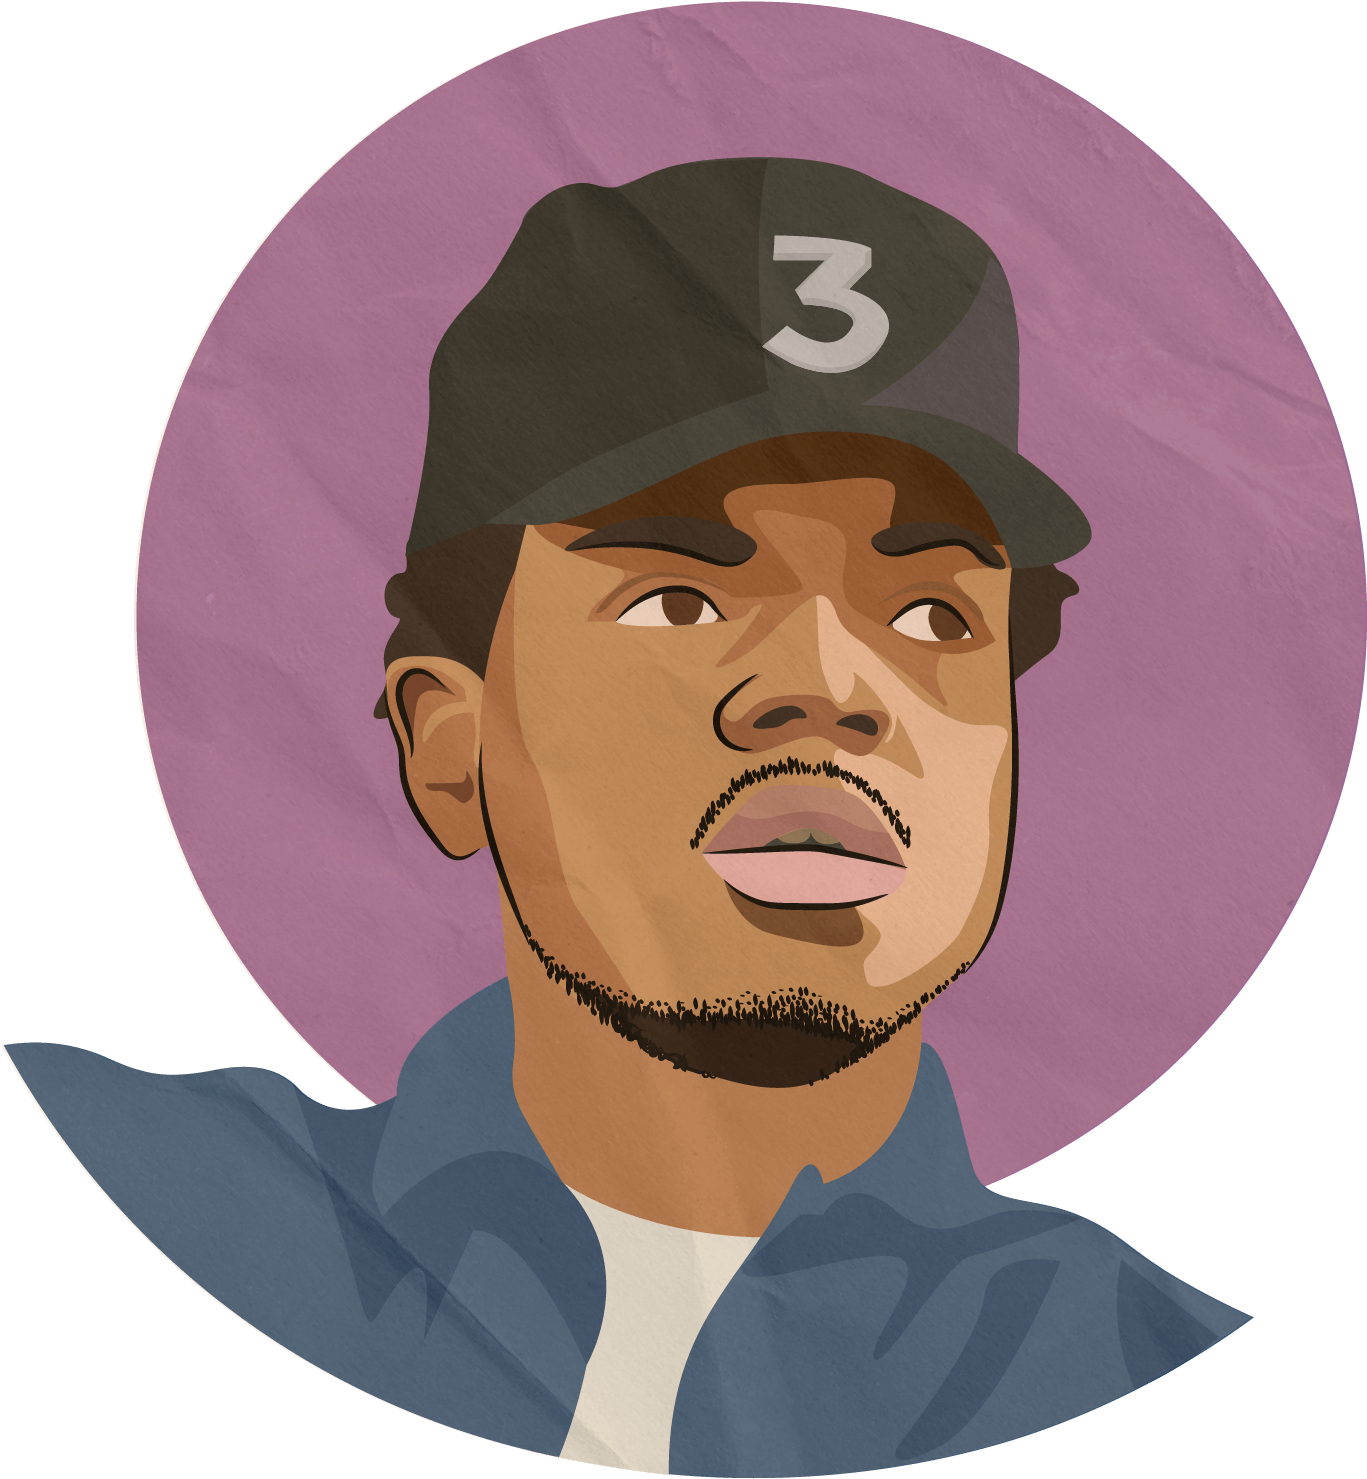 Chance The Rapper Illustration - Macro And Micro Environment (1600x1600)